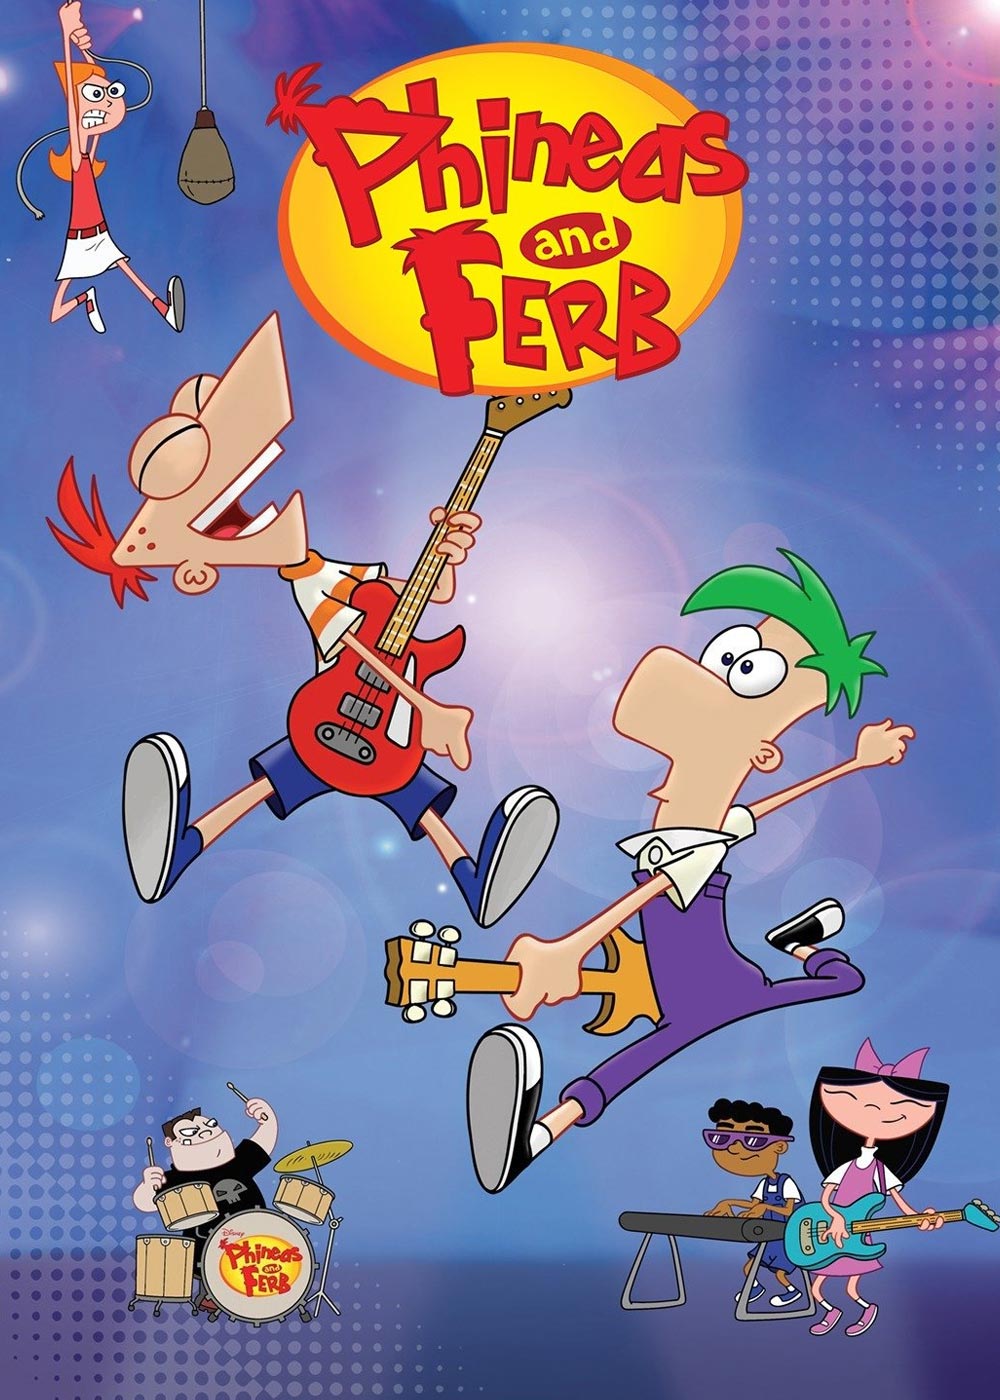 Phineas and Ferb Season 2